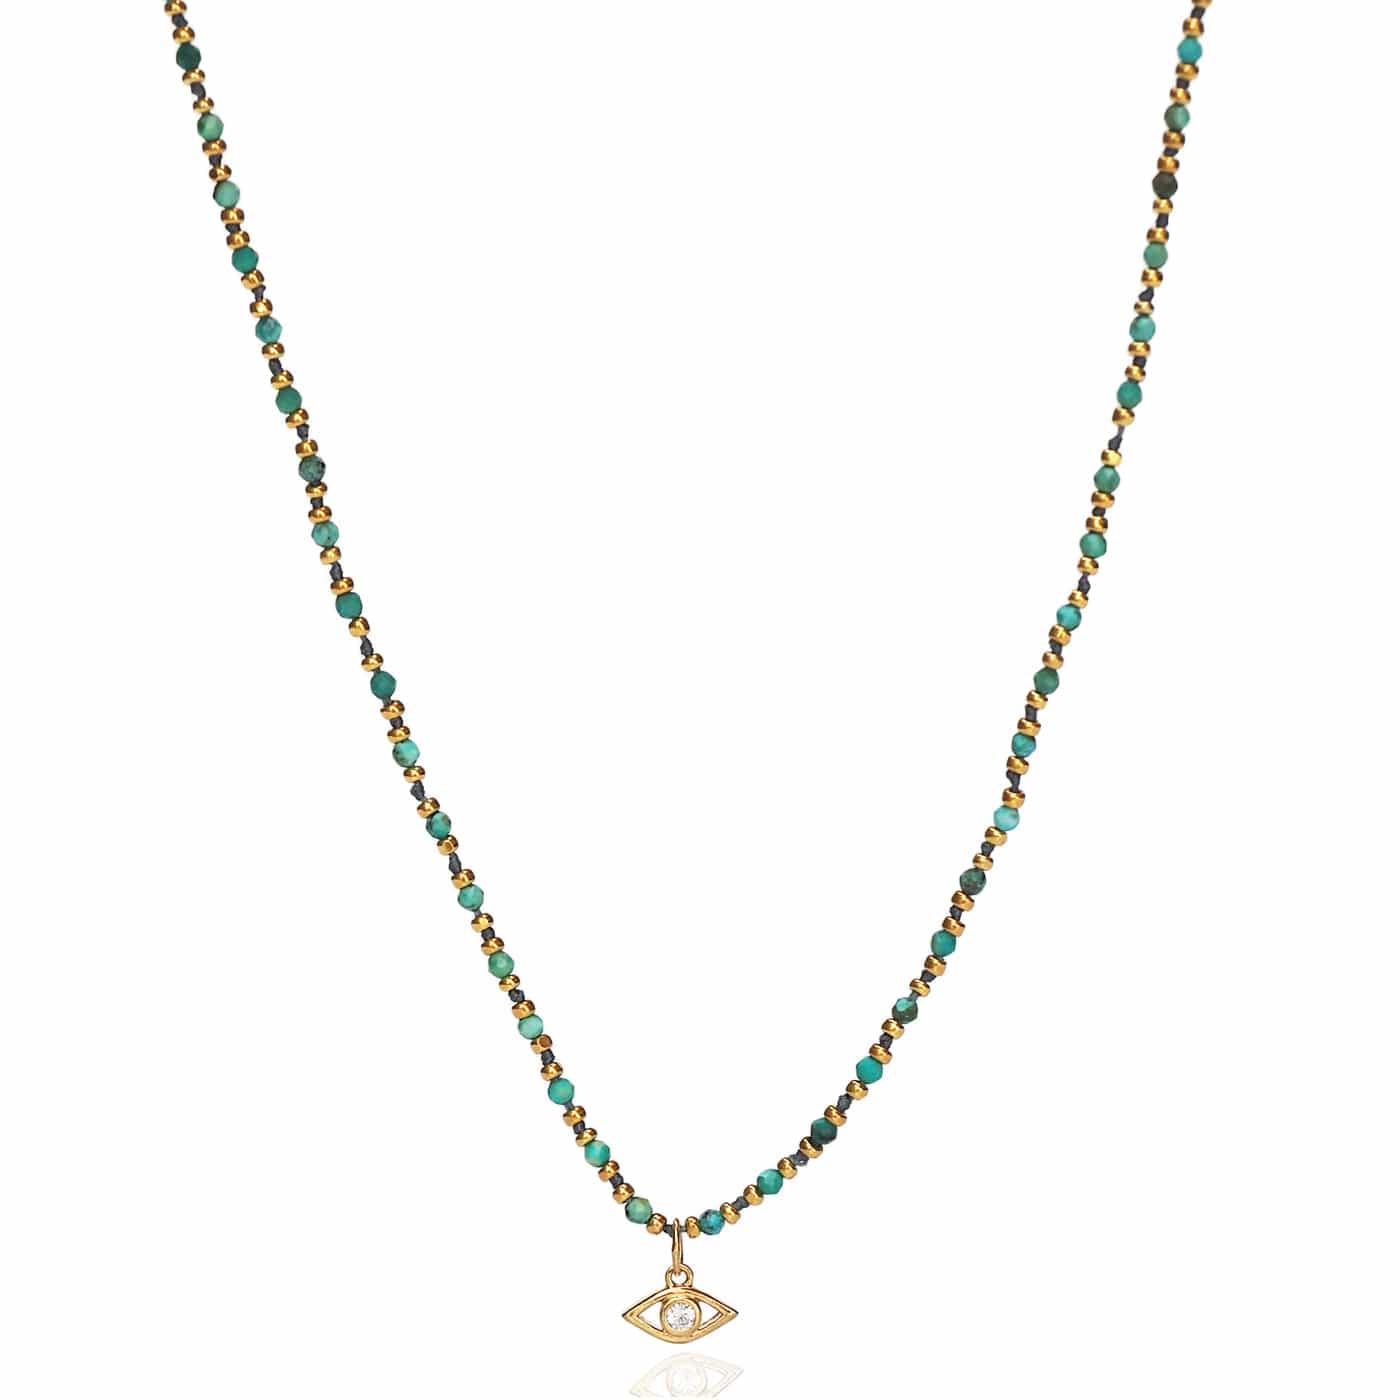 TAI JEWELRY Necklace Turquoise Handmade Beaded Necklace With Dangle Accent